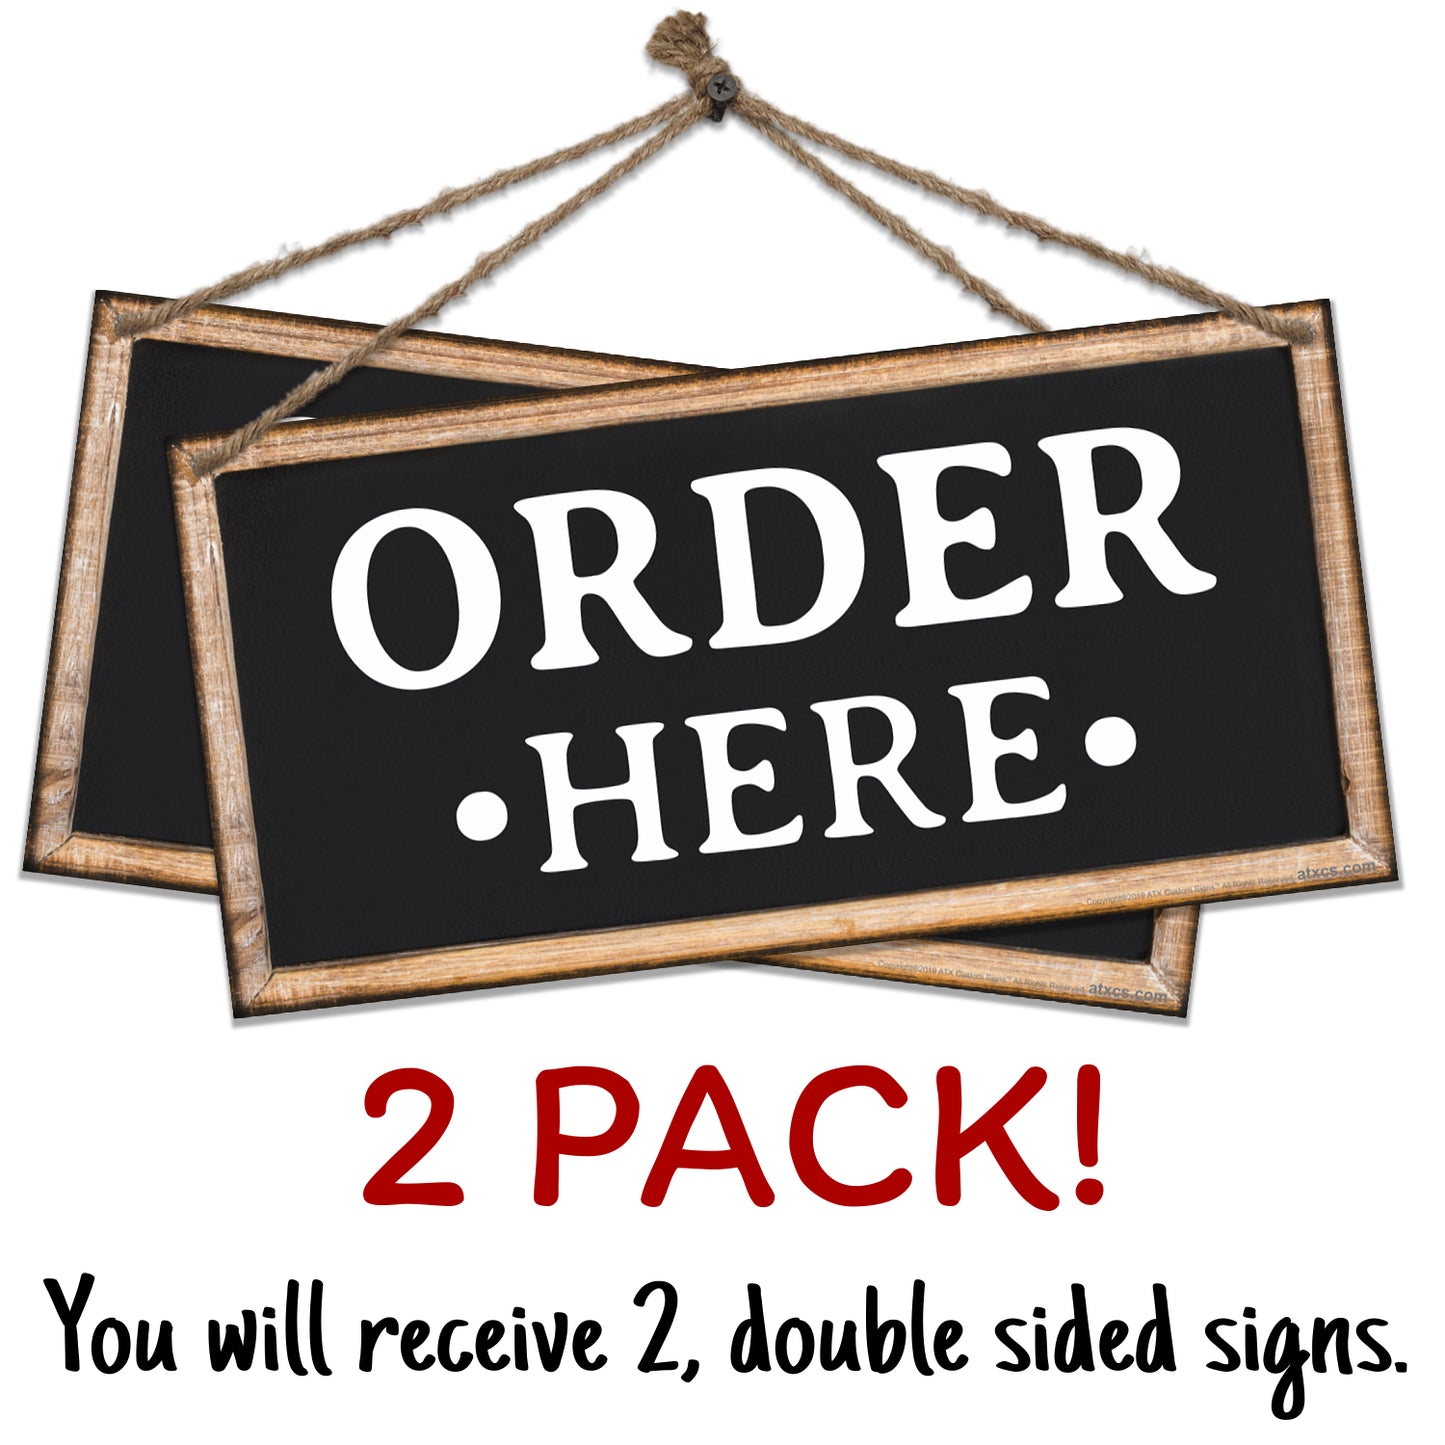 ATX CUSTOM SIGNS - Order Here and Pick Up Here Signs 2 pack Black and White